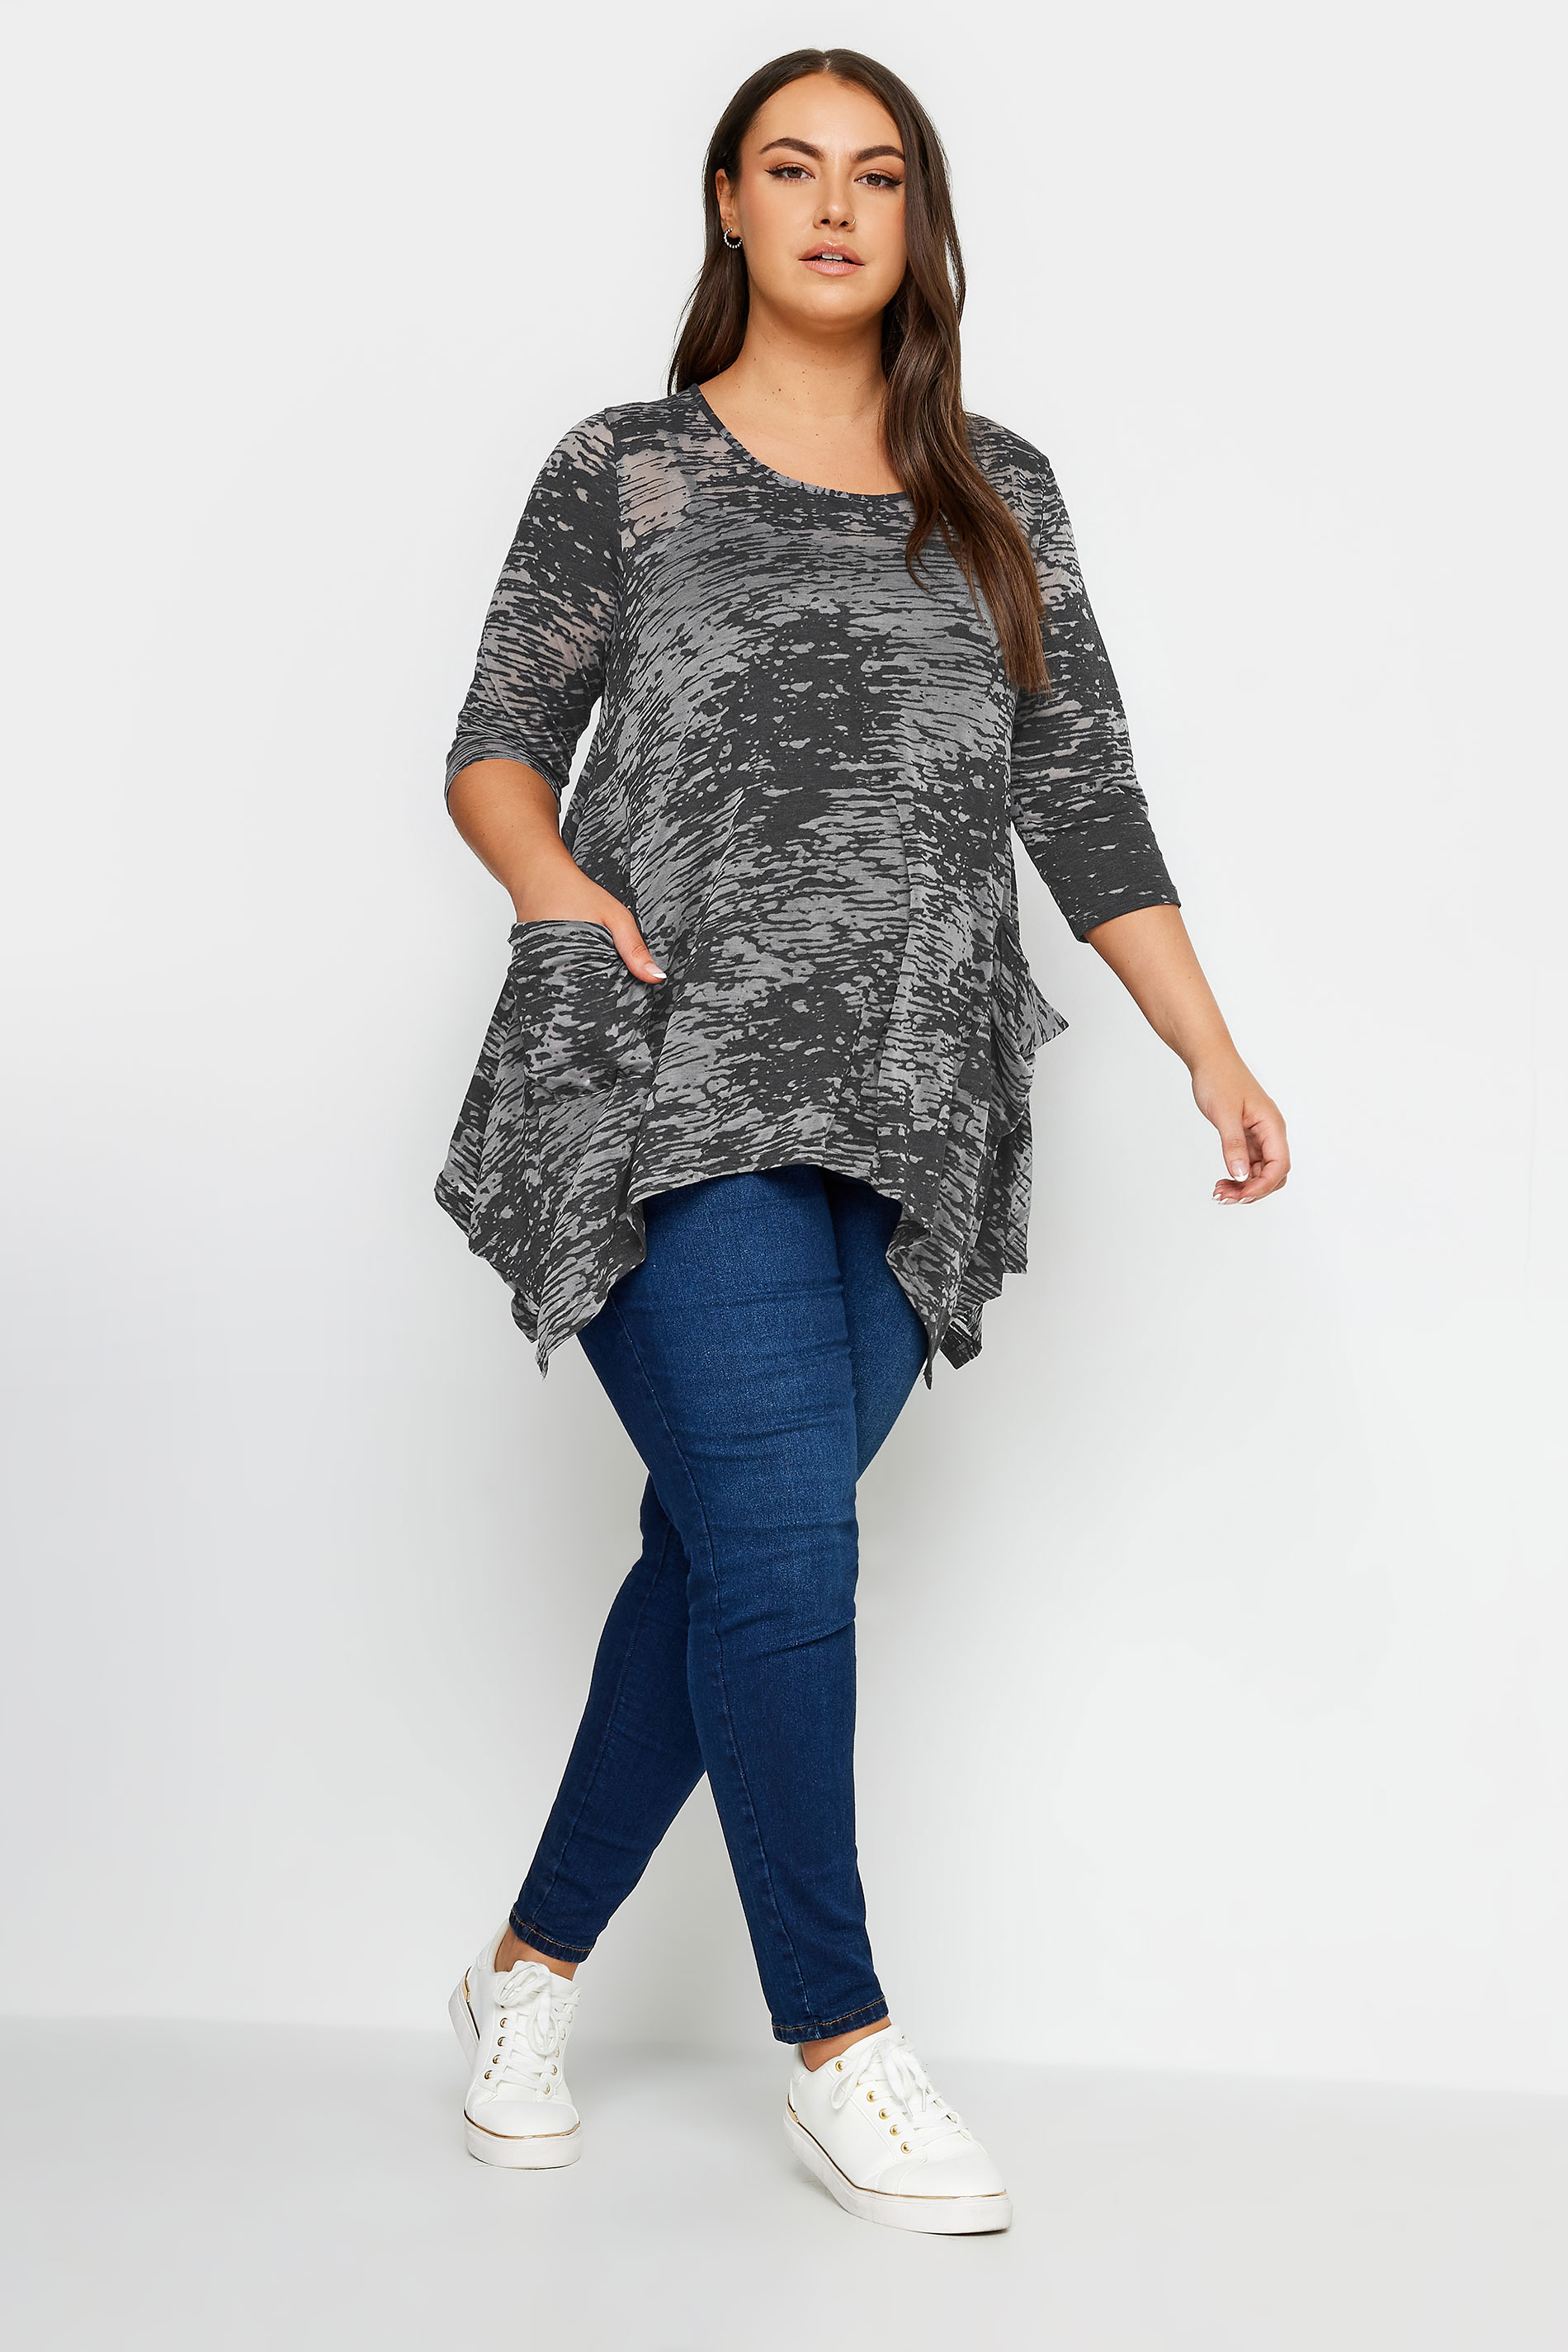 YOURS Plus Size Black Abstract Print Pocket Top | Yours Clothing 2